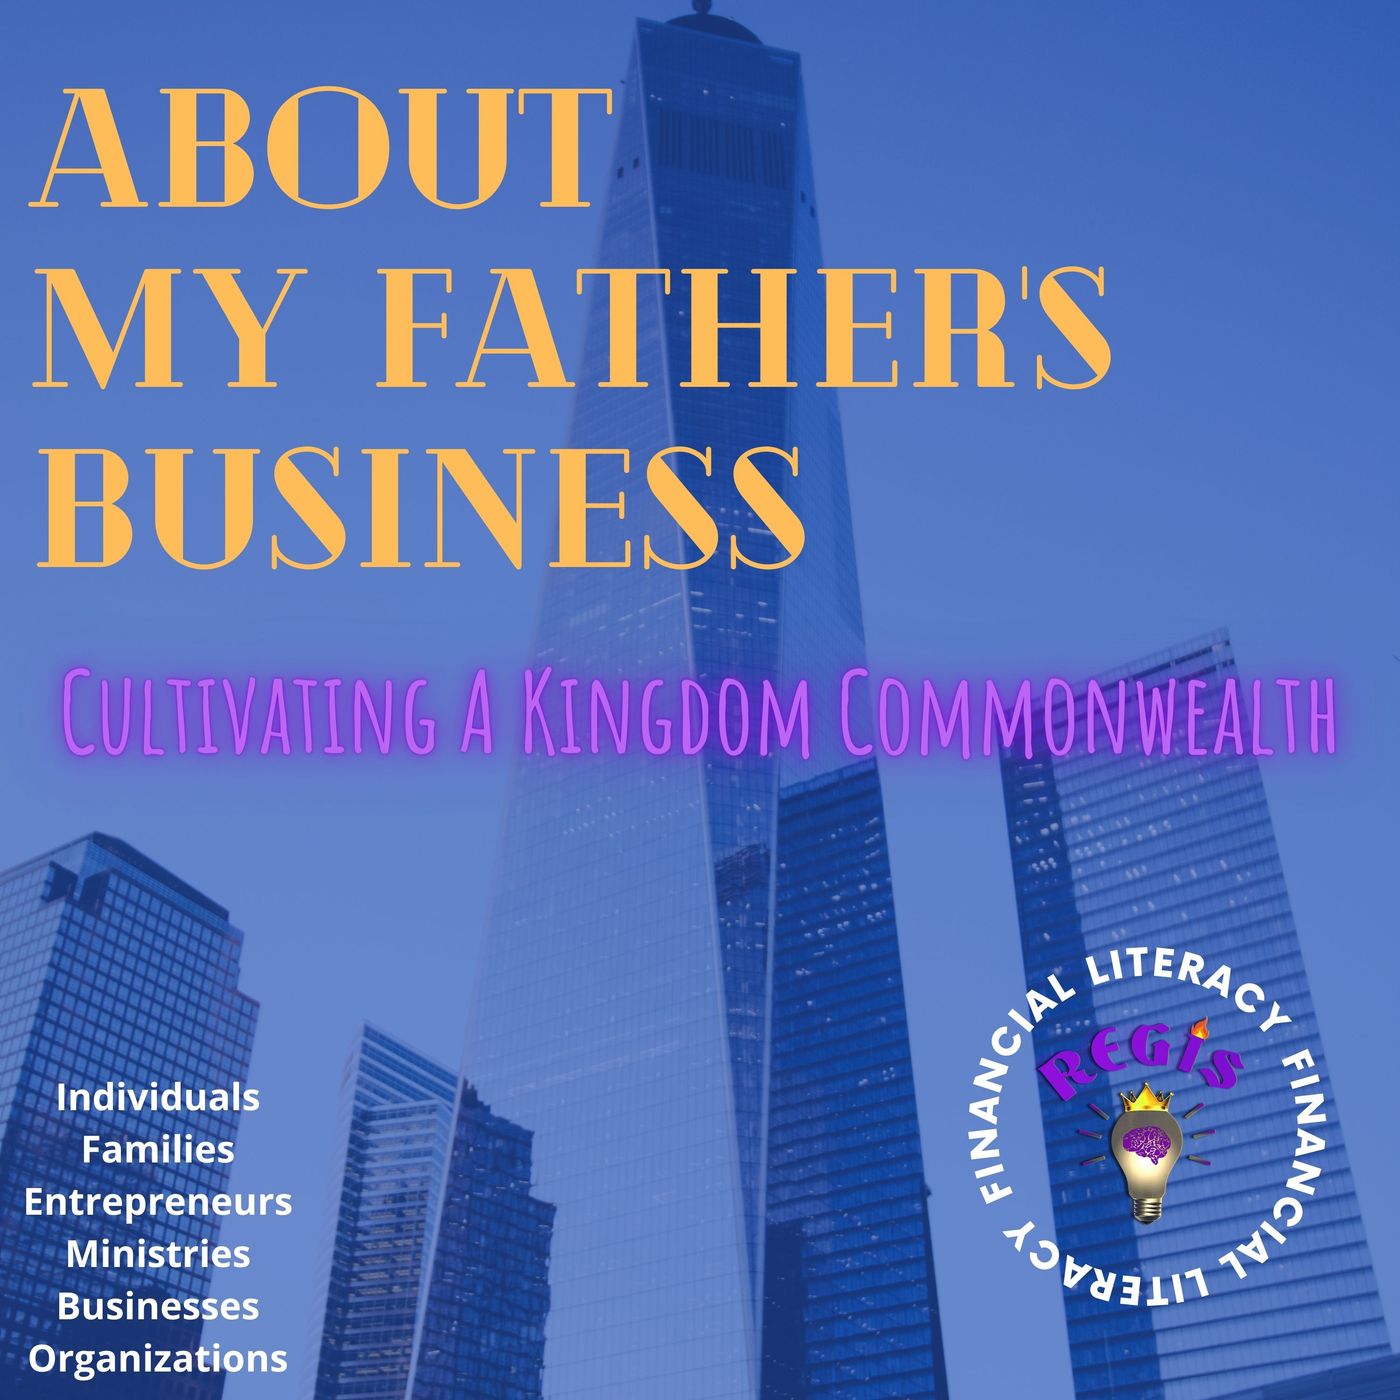 About My Father’s Business